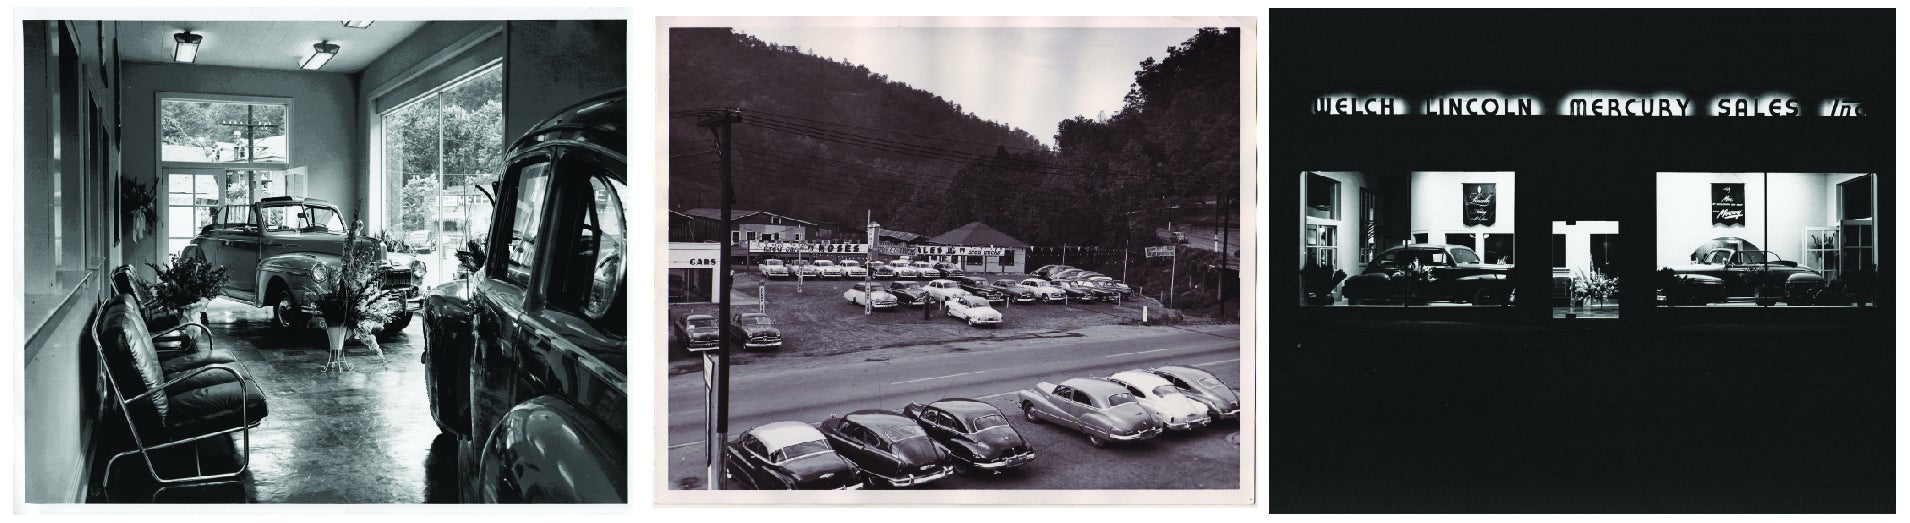 Moses Dealership in Welch, WV